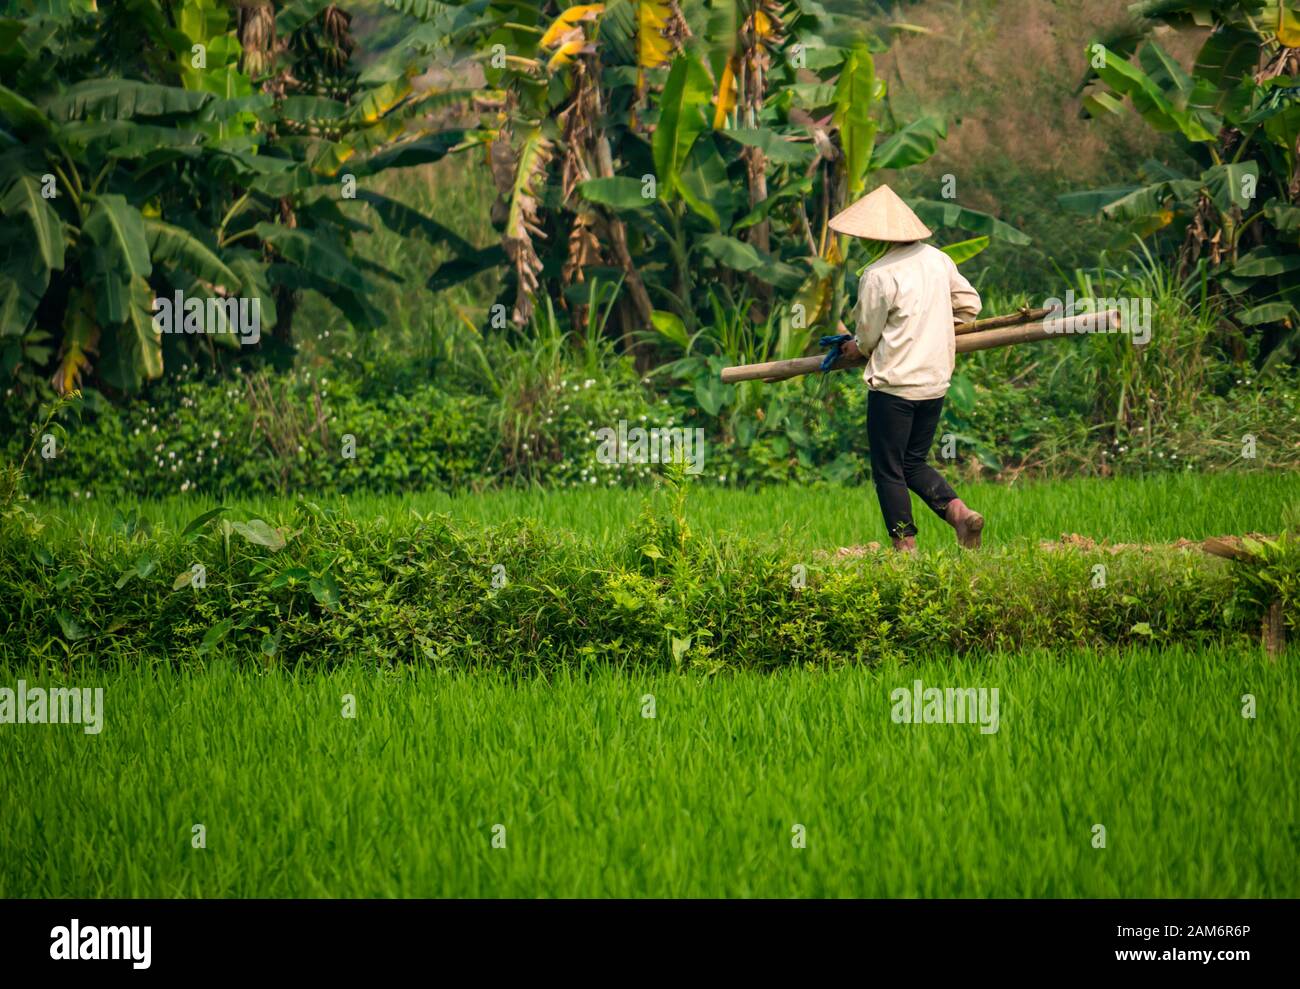 Local Asian woman wearing conical hat carrying timber working in rice paddy field, Tam Coc, Ninh Binh, Vietnam, Asia Stock Photo